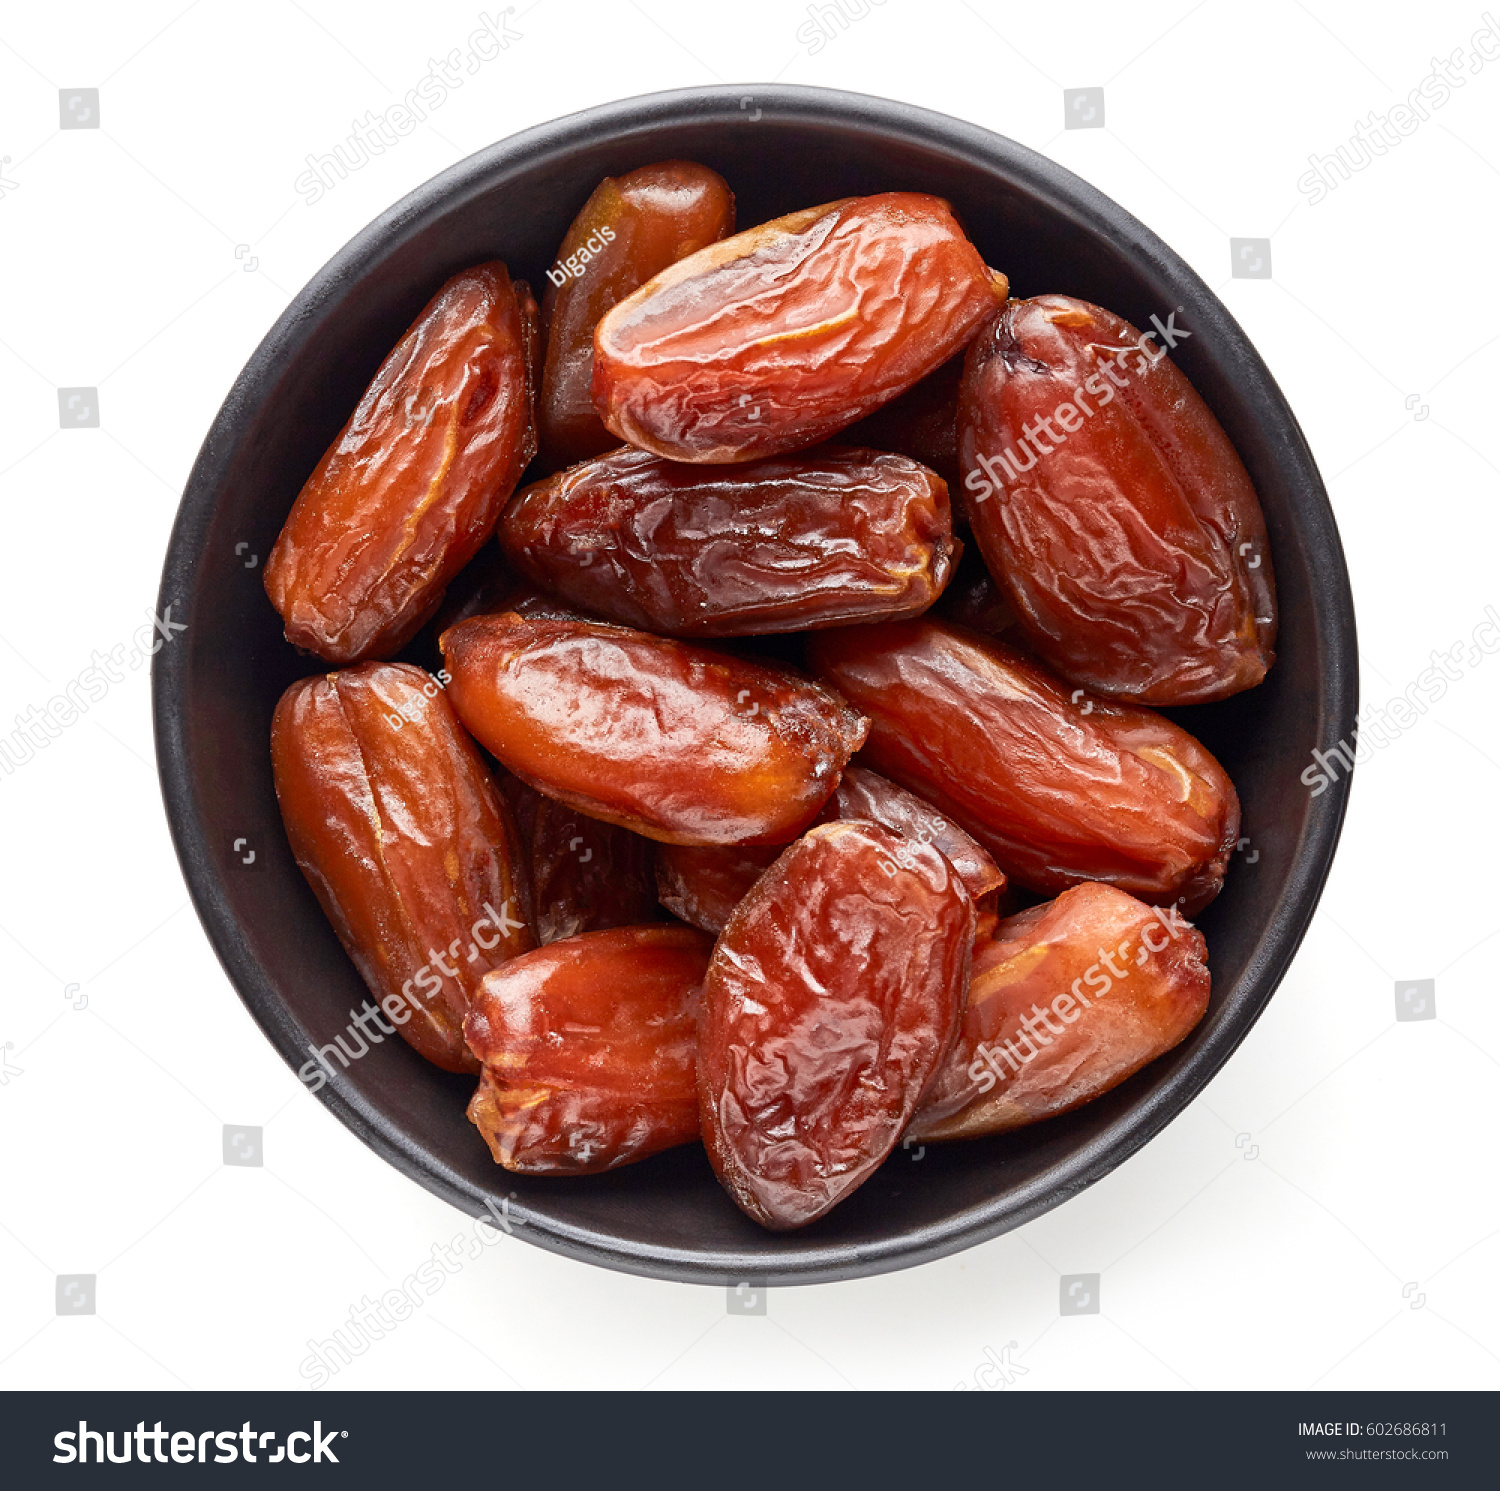 Bowl of pitted dates isolated on white background, top view #602686811